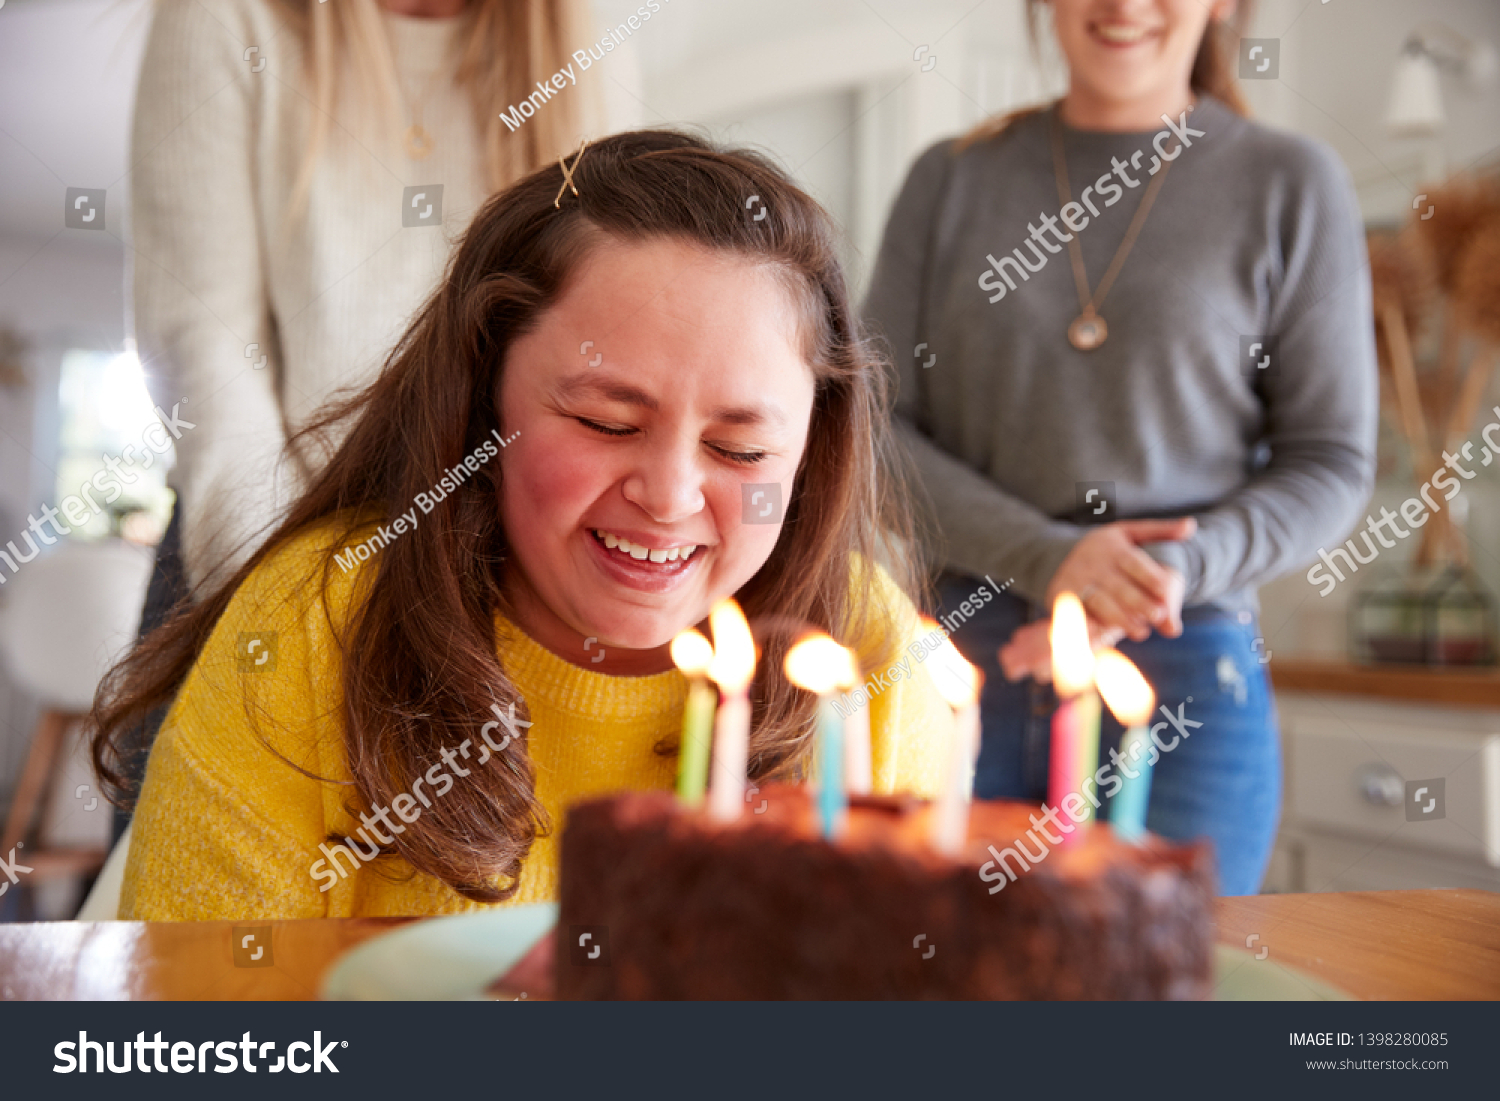 Young Downs Syndrome Woman Celebrating Birthday Stock Photo 1398280085 ...